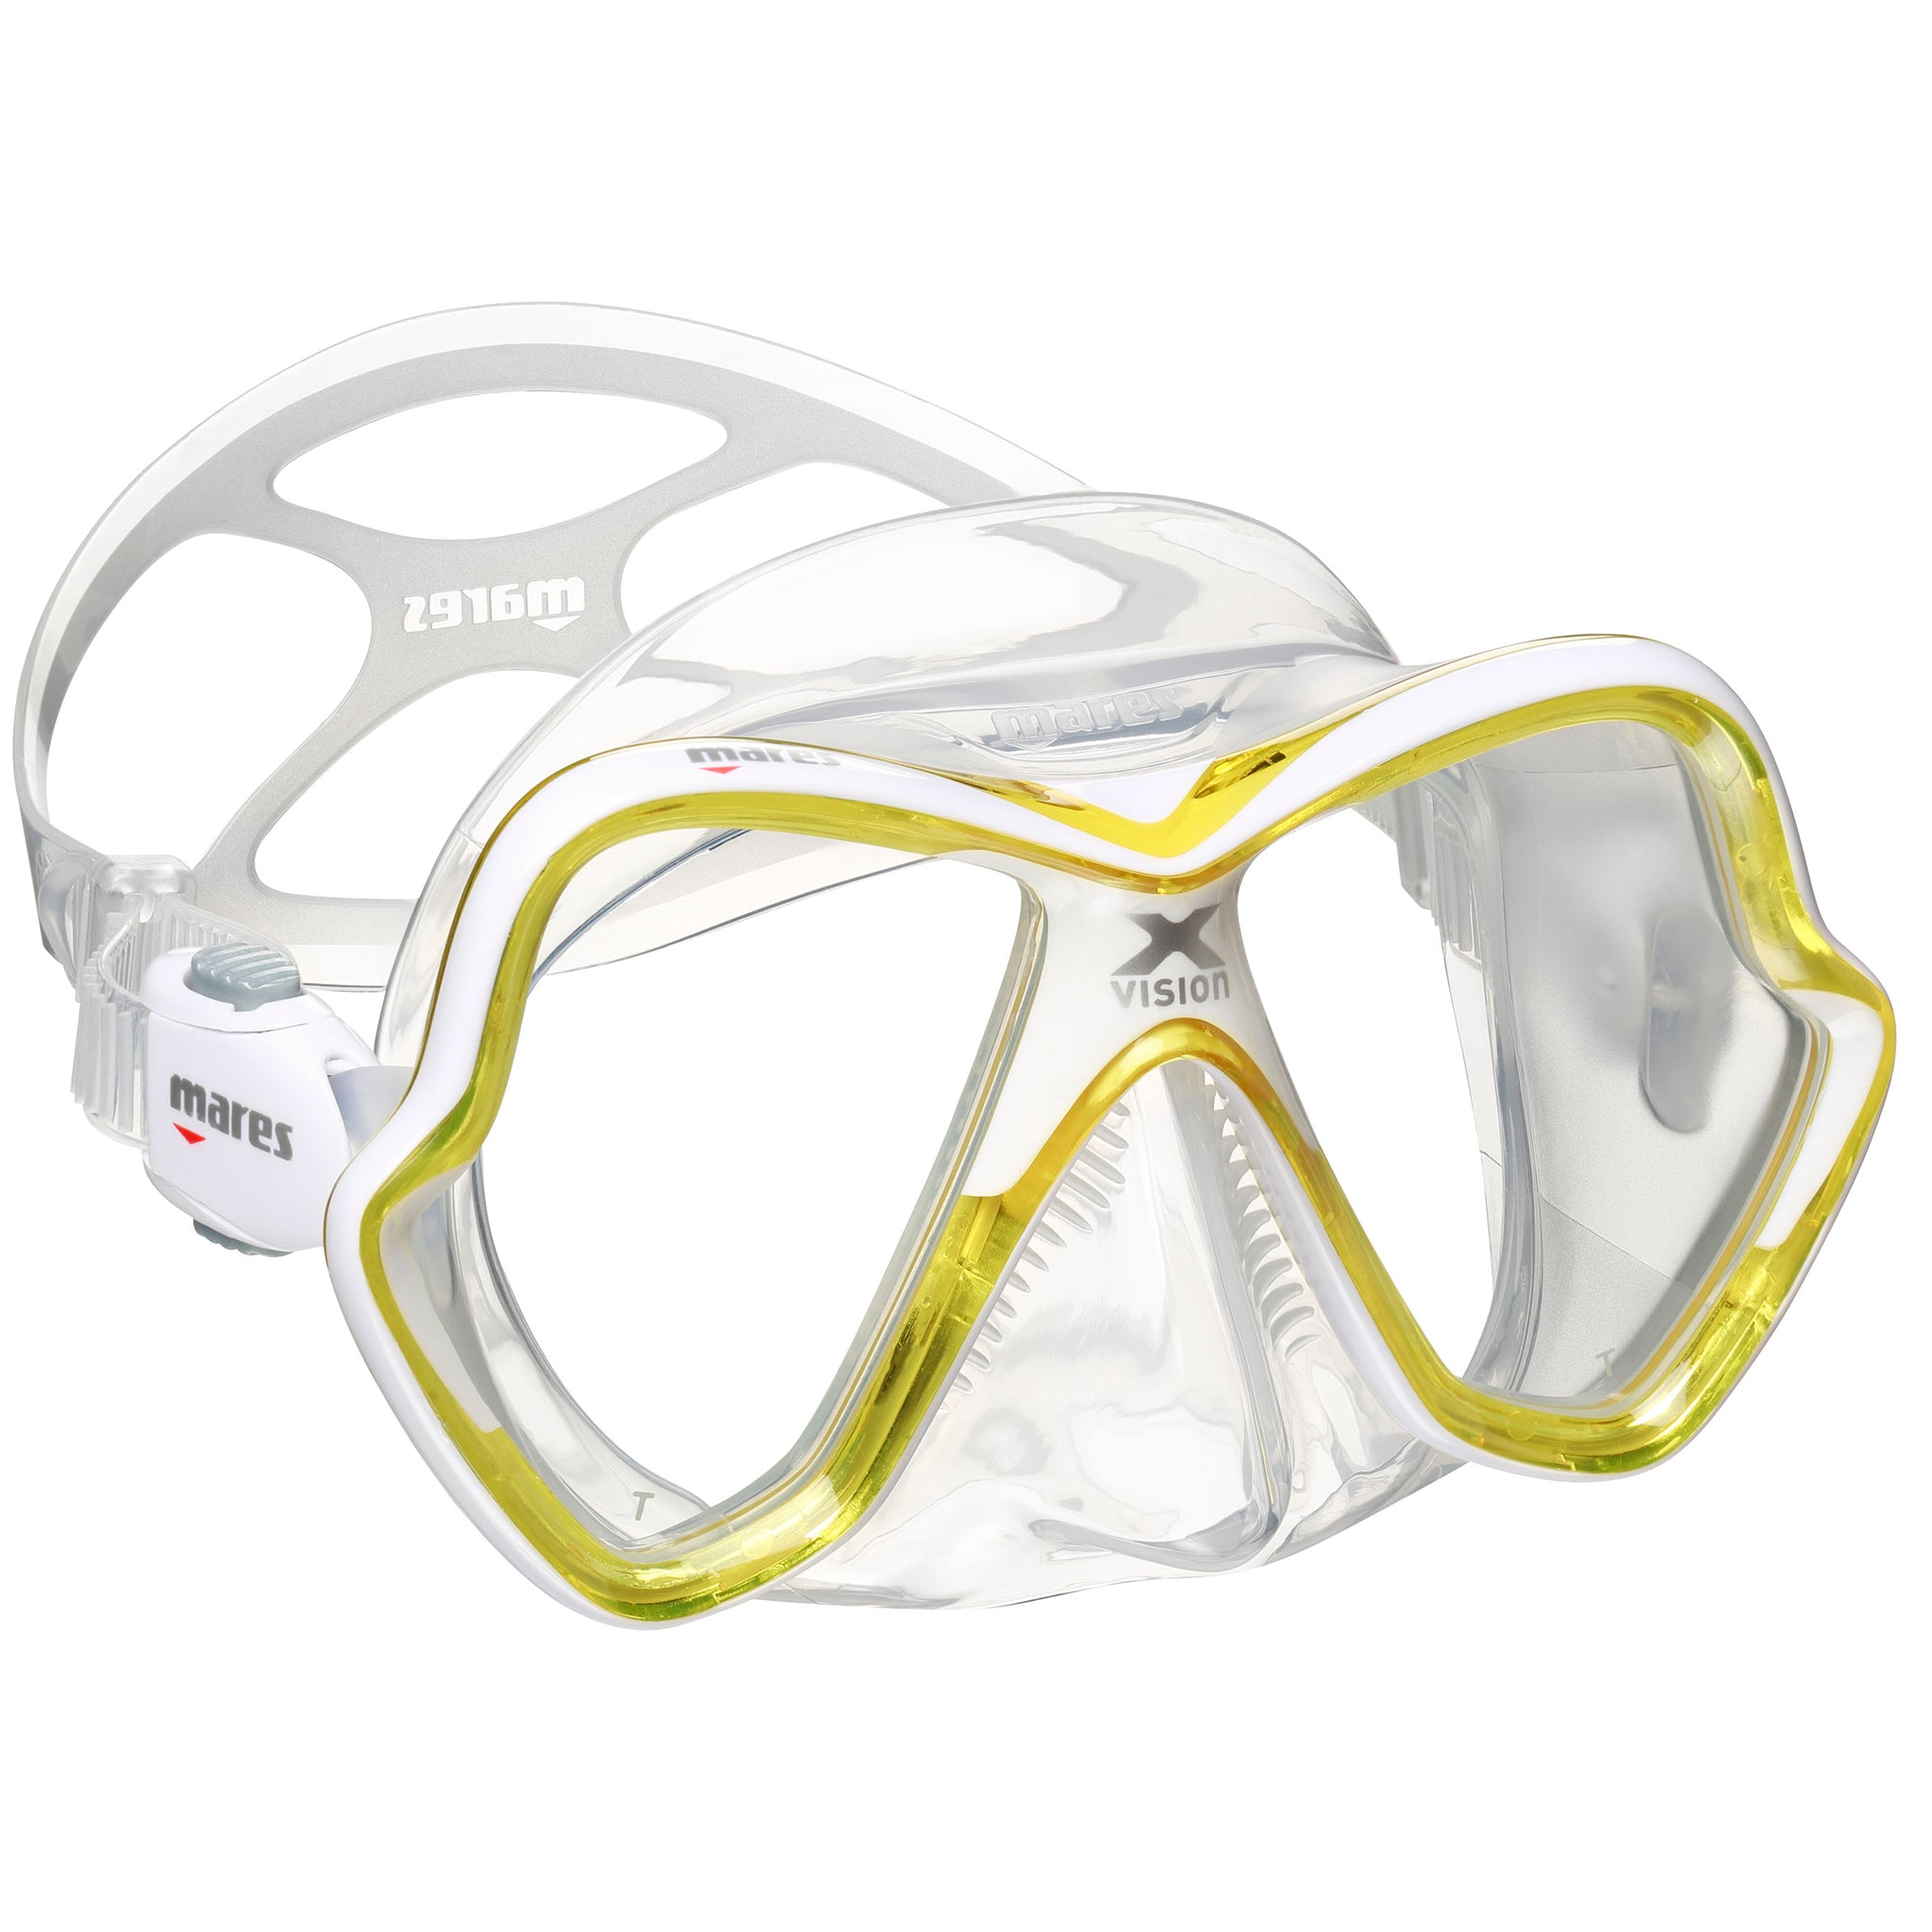 Mares X Vision Mask | White/Yellow/Clear